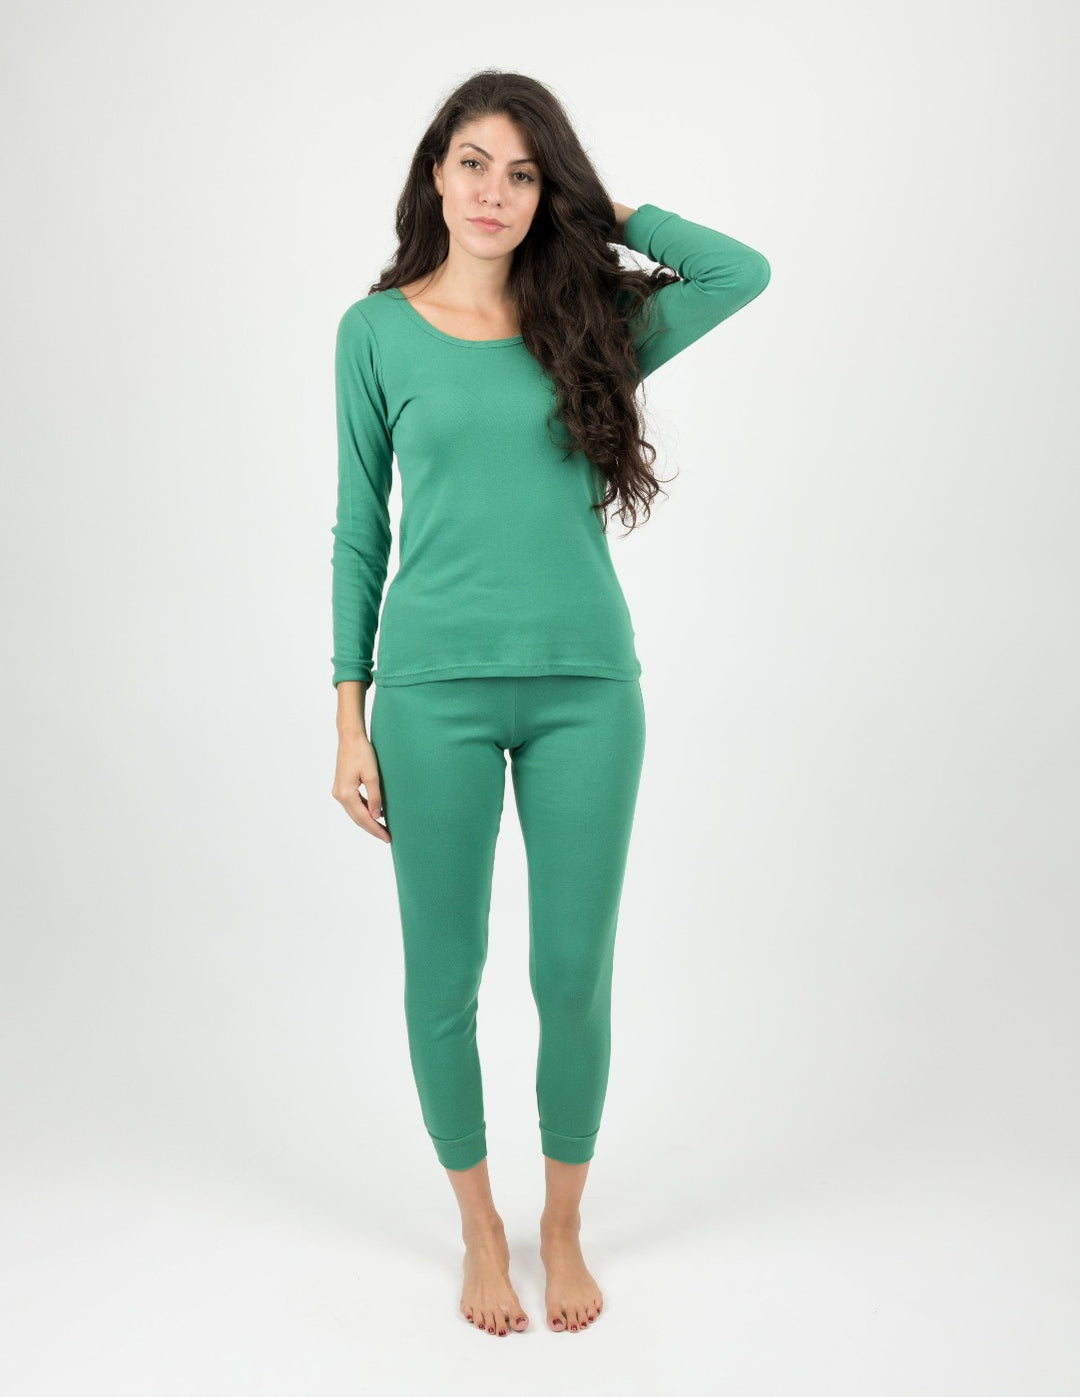 NANJIREN Womens Cotton Thermal Leggings Set Super Thick Cotton Long Johns  And Solid Color Thermal Pajamas For Casual Wear 231127 From Mang04, $41.71